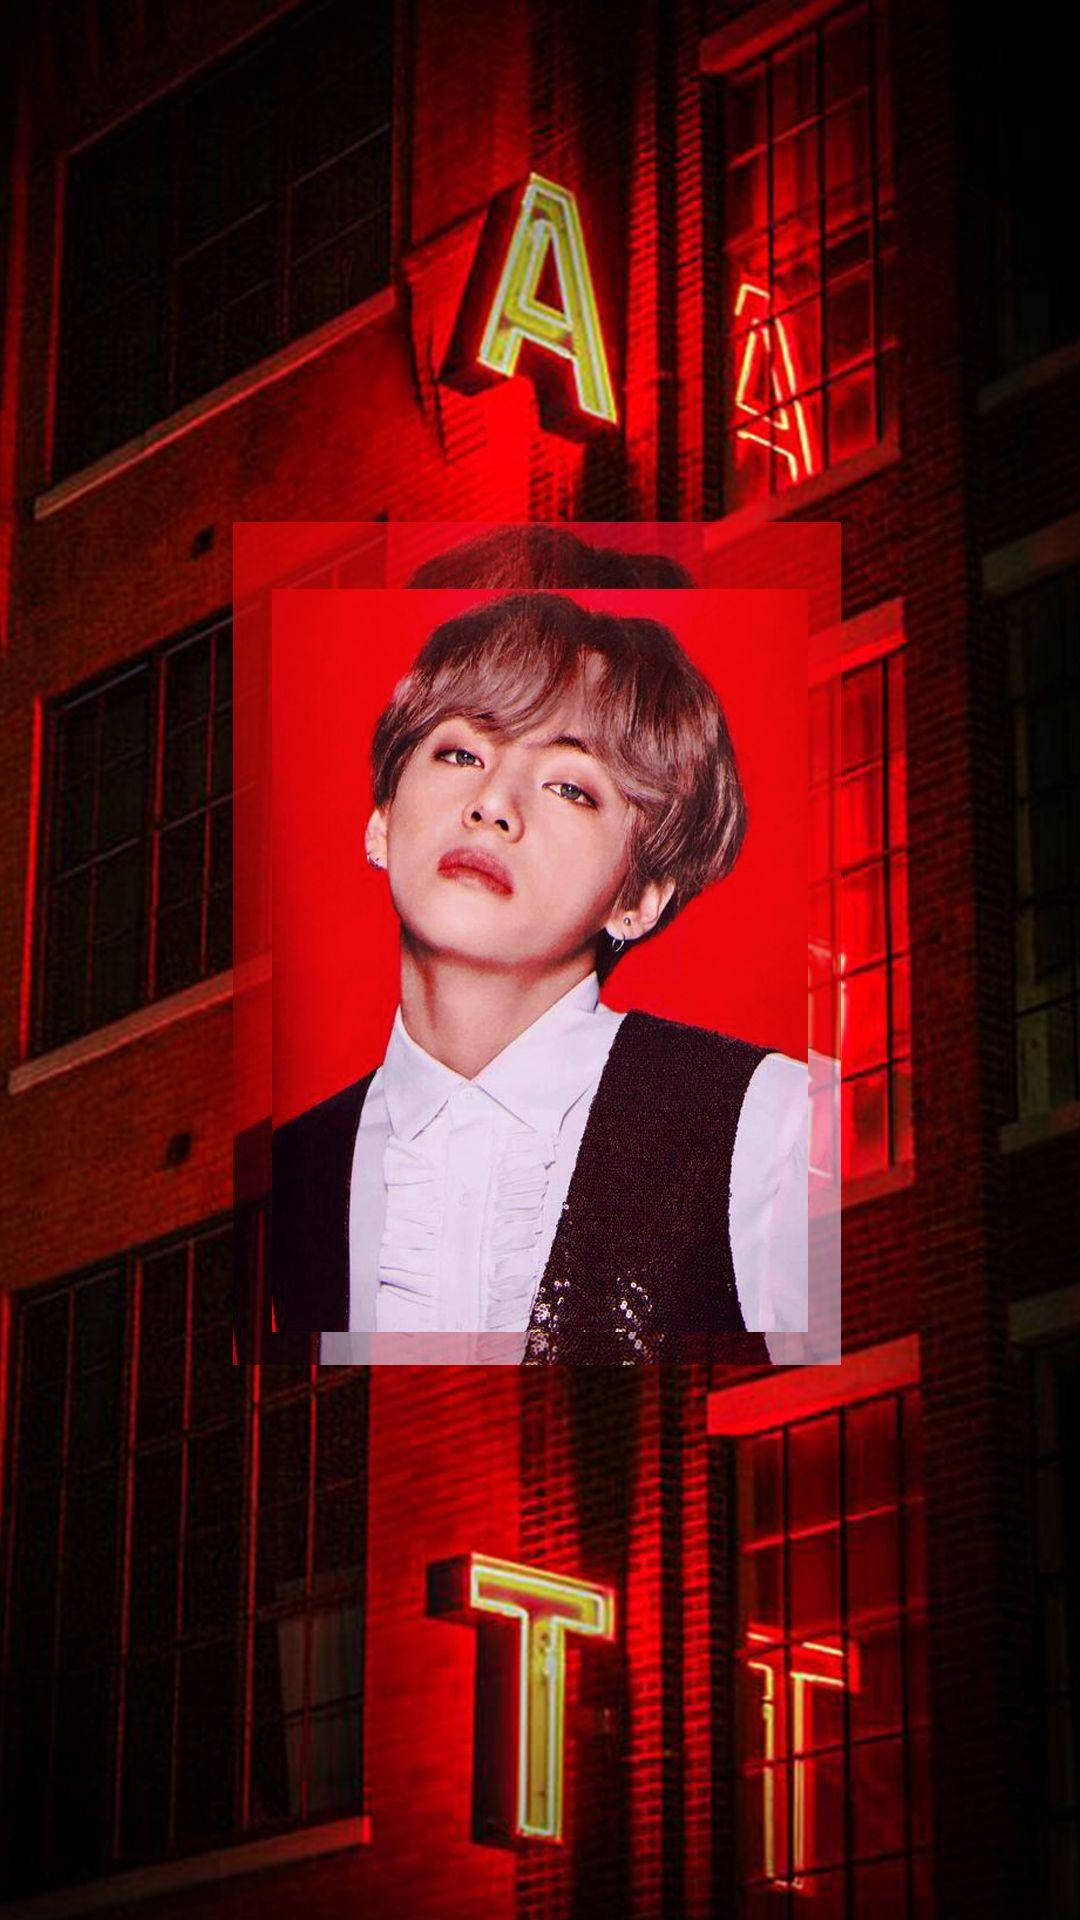 Bts Kim Taehyung Red Aesthetic Iphone